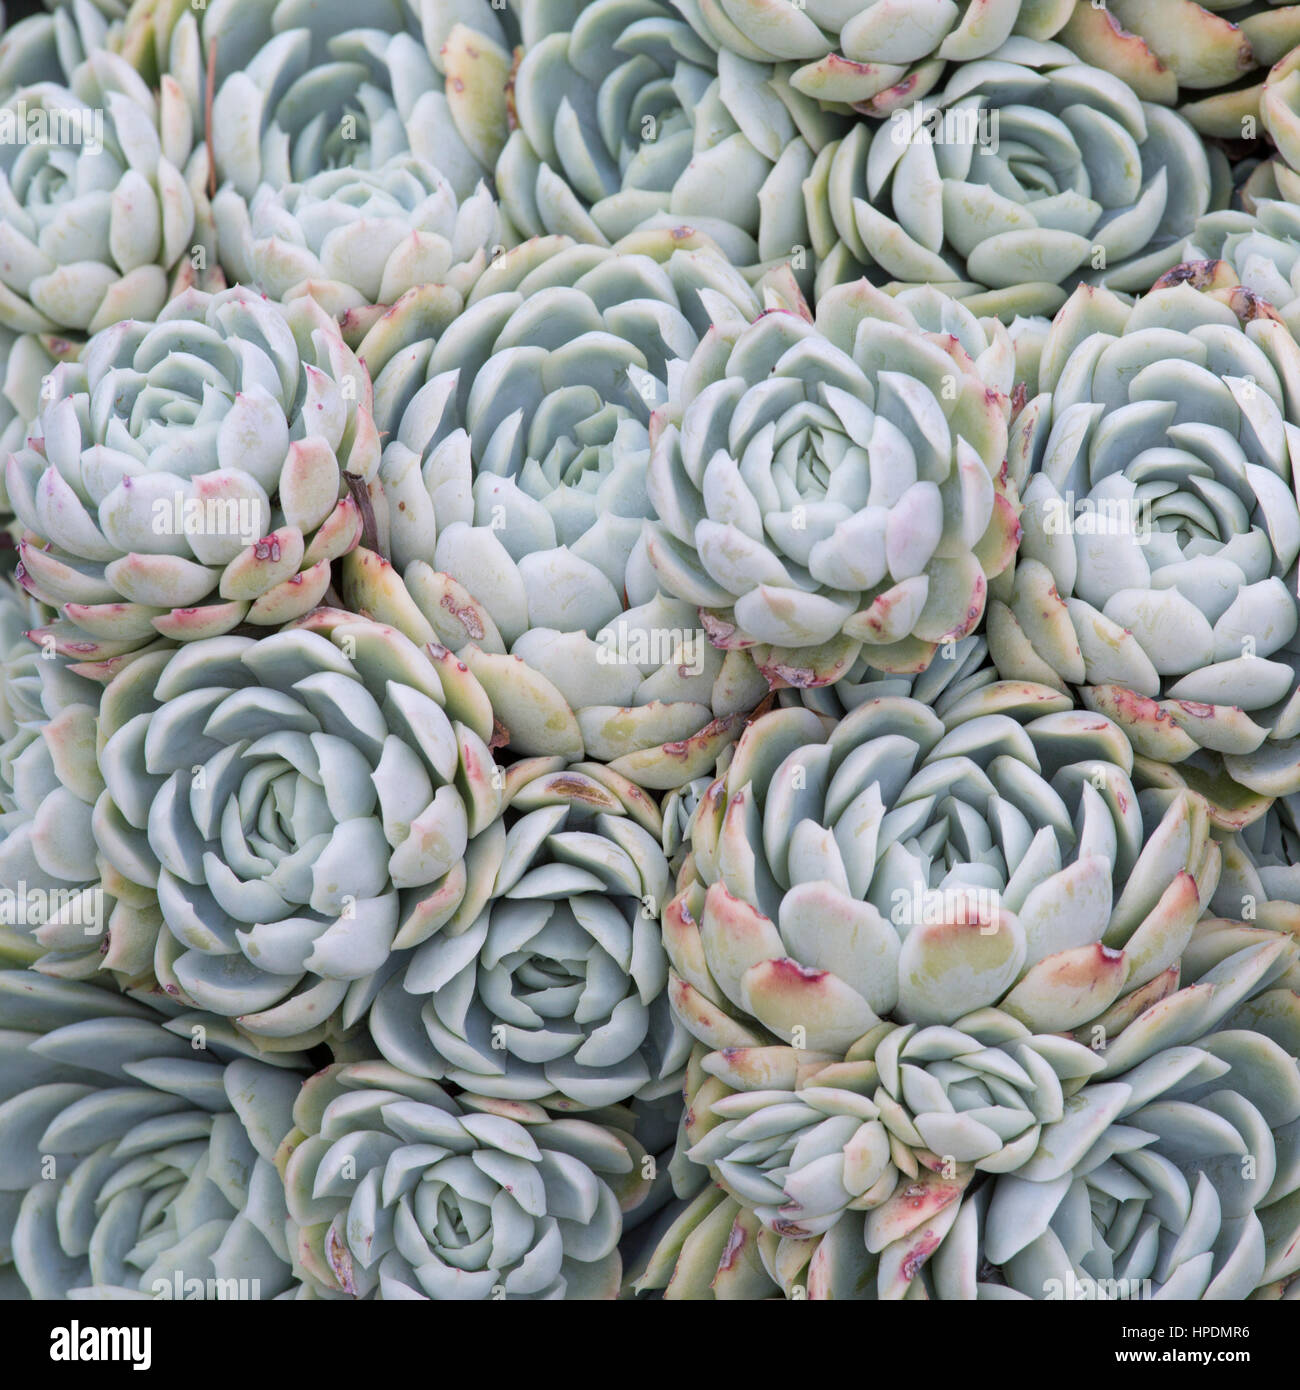 Christchurch, Canterbury, New Zealand. Tightly packed rosettes of Echeveria elegans on display in Christchurch Botanic Gardens. Stock Photo